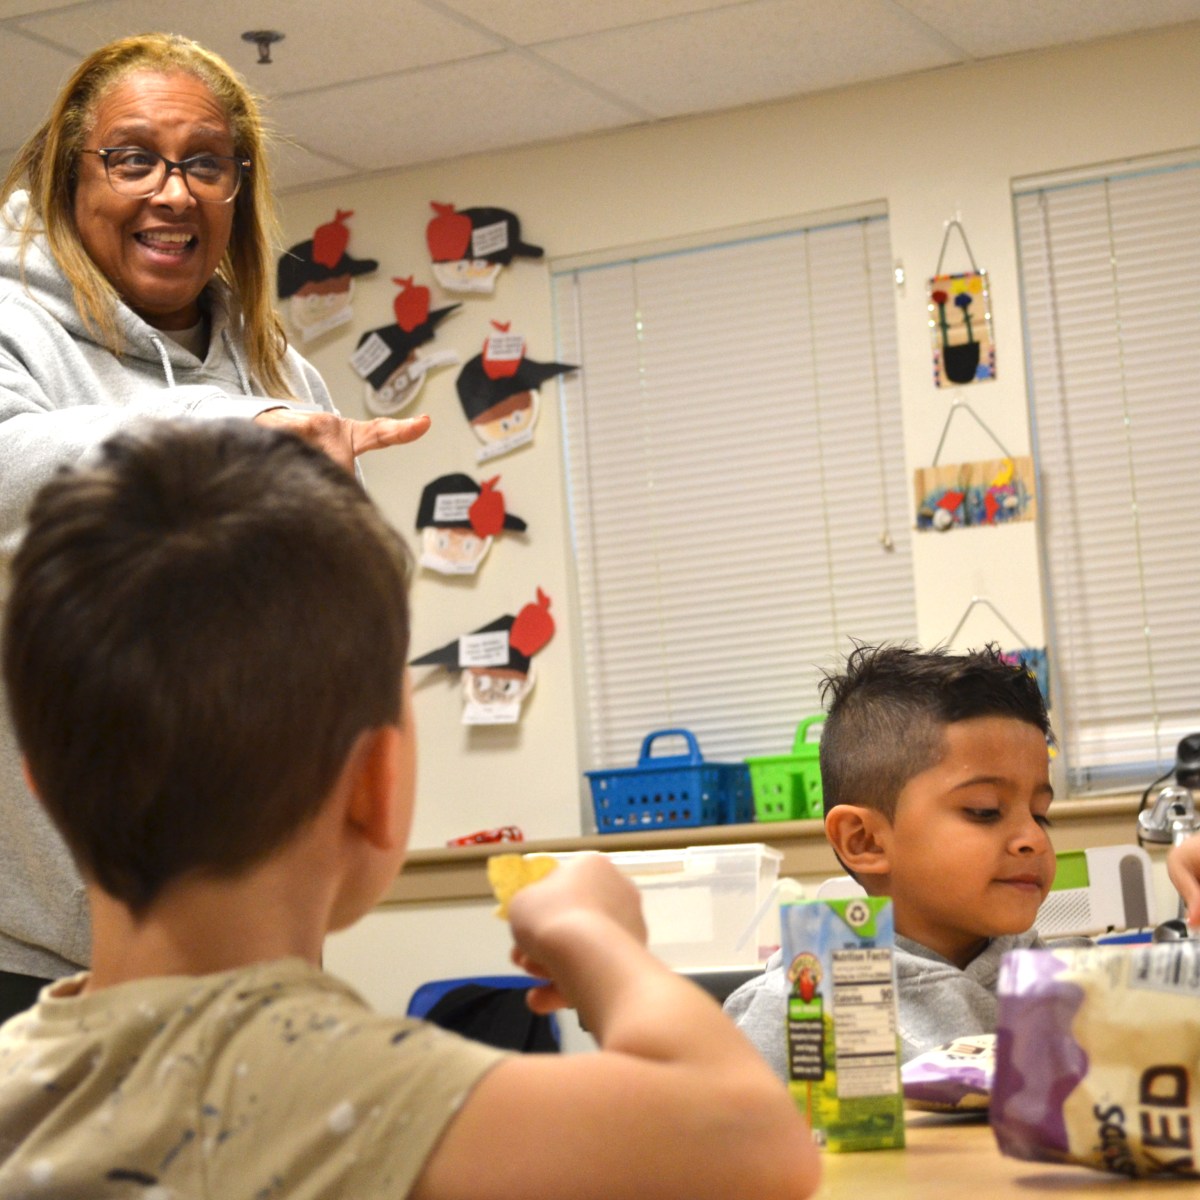 What’s it like to work in a child care desert?